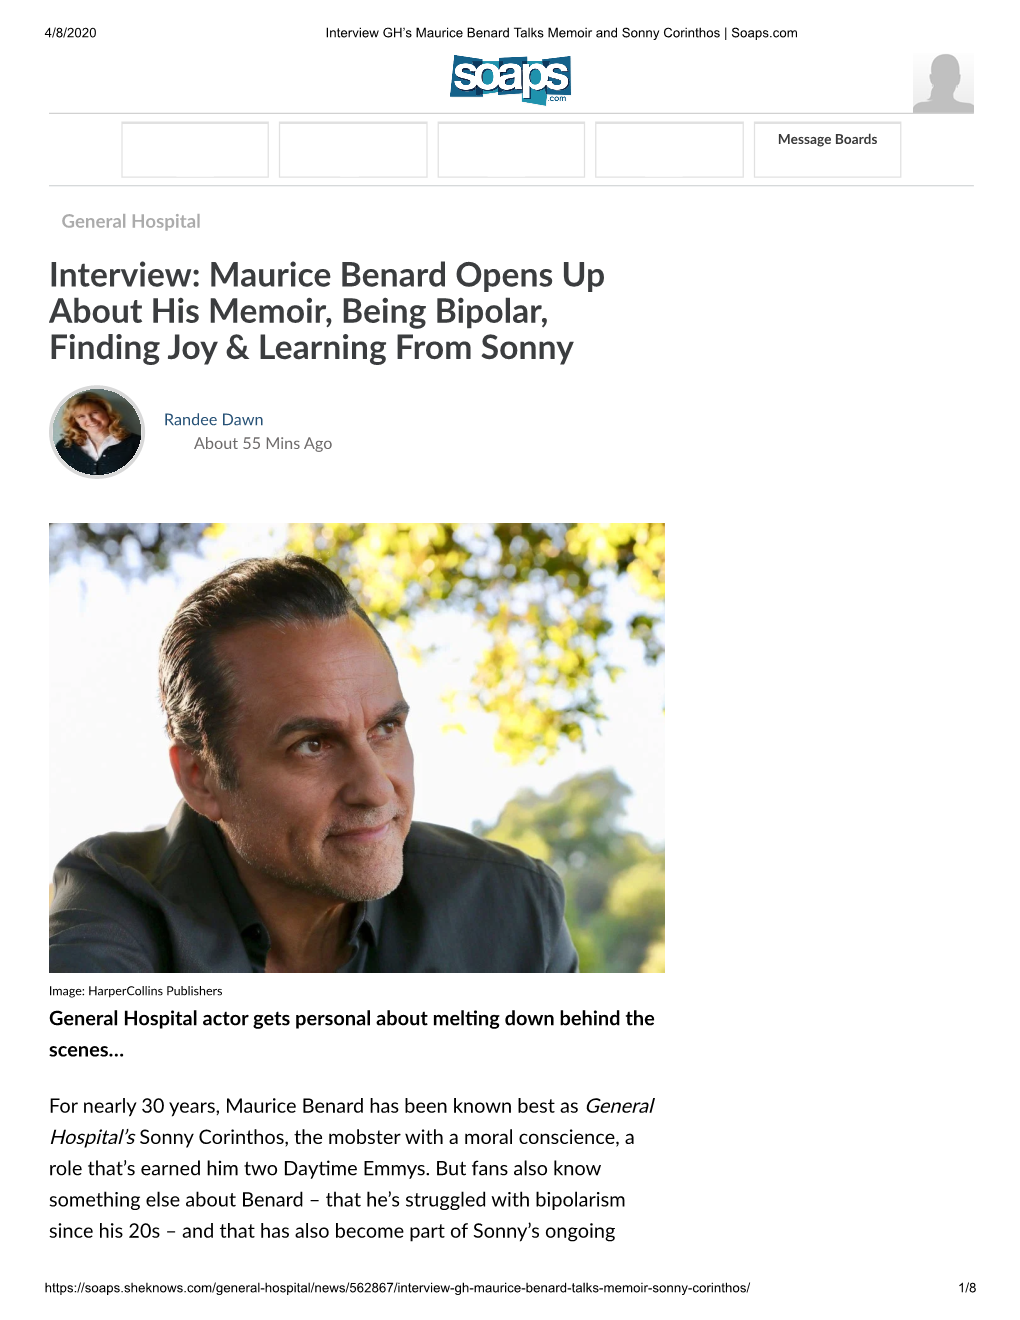 Interview: Maurice Benard Opens up About His Memoir, Being Bipolar, Finding Joy & Learning from Sonny